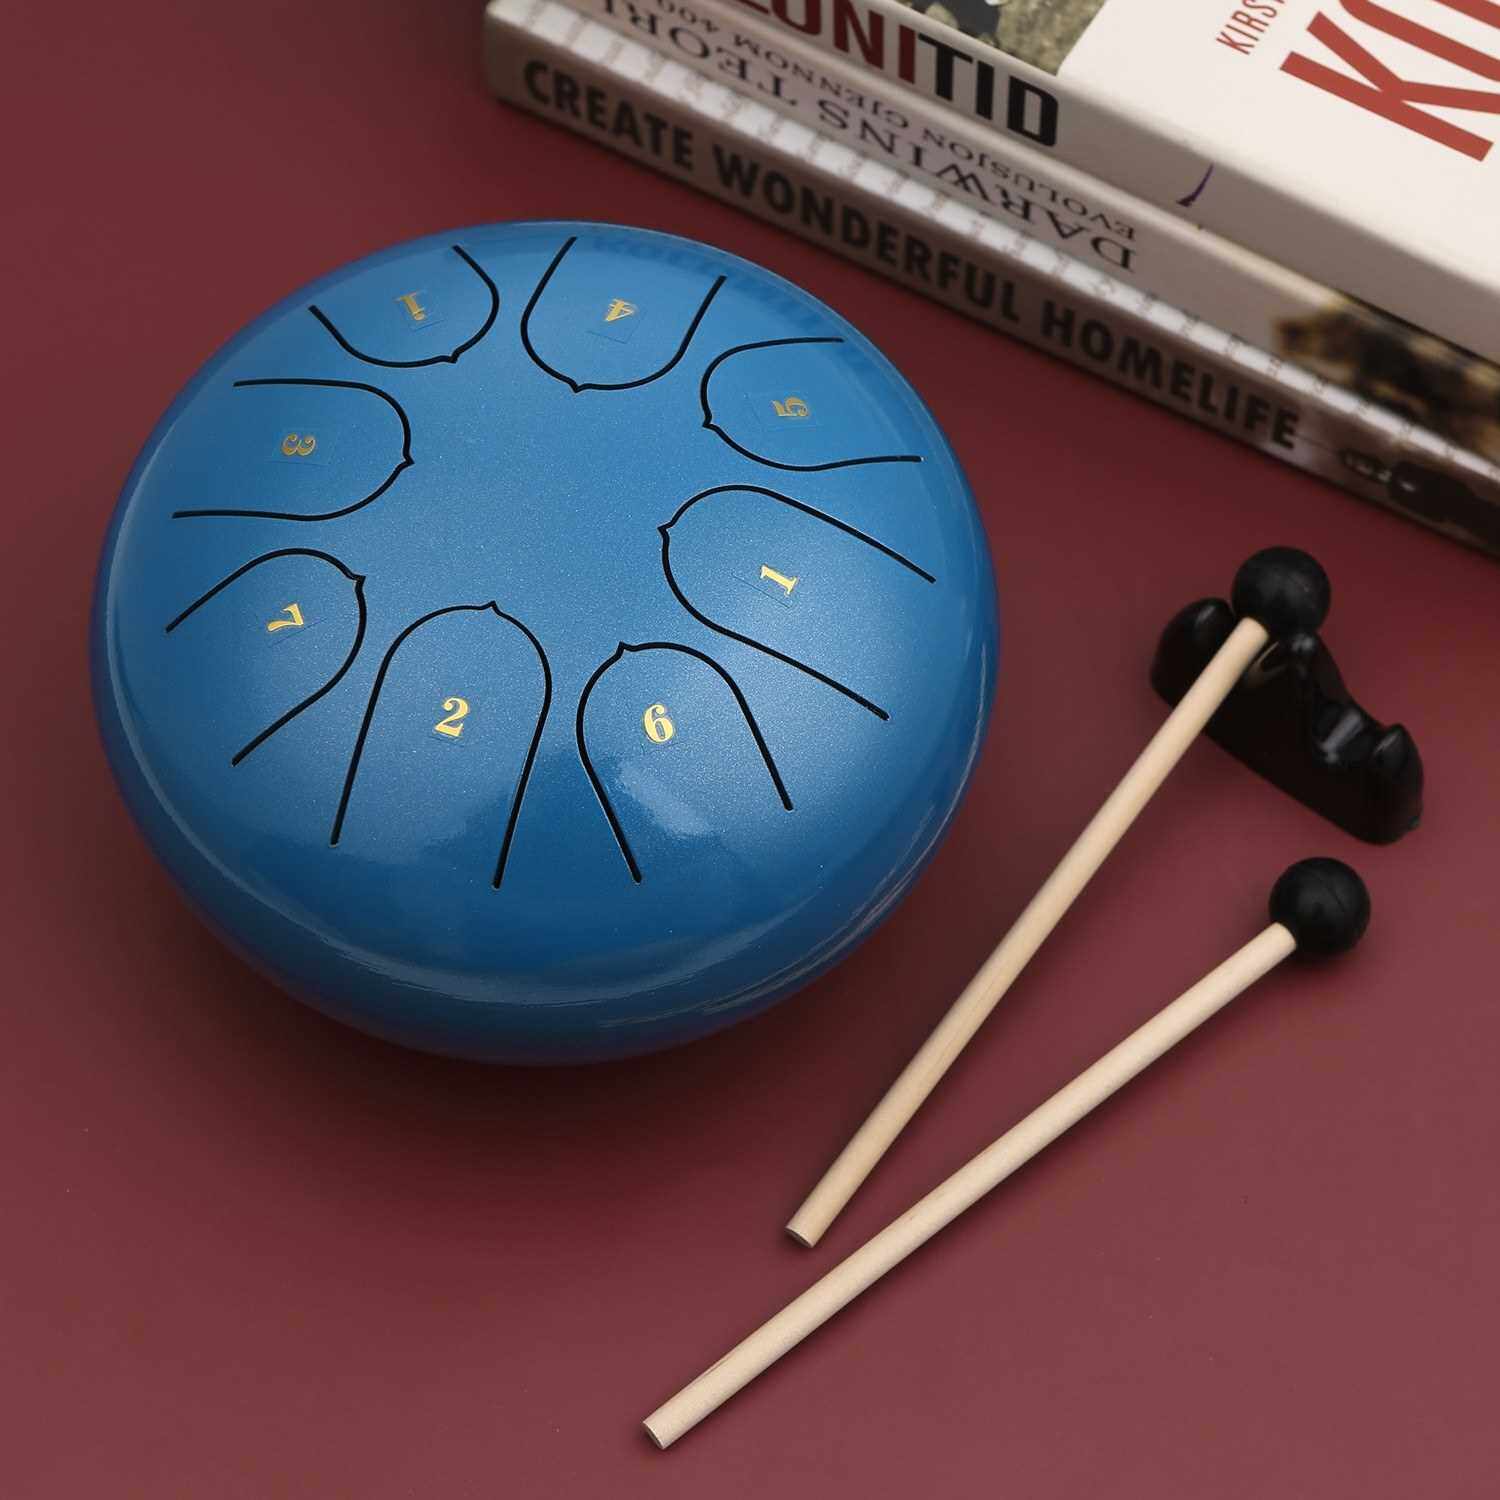 8 Notes C-key 6-inch Mini Steel Tongue Drum Hand Pan Drum Percussion Instrument with Drumsticks for Musical Education Concert Mind Healing Yoga Meditation (Blue)